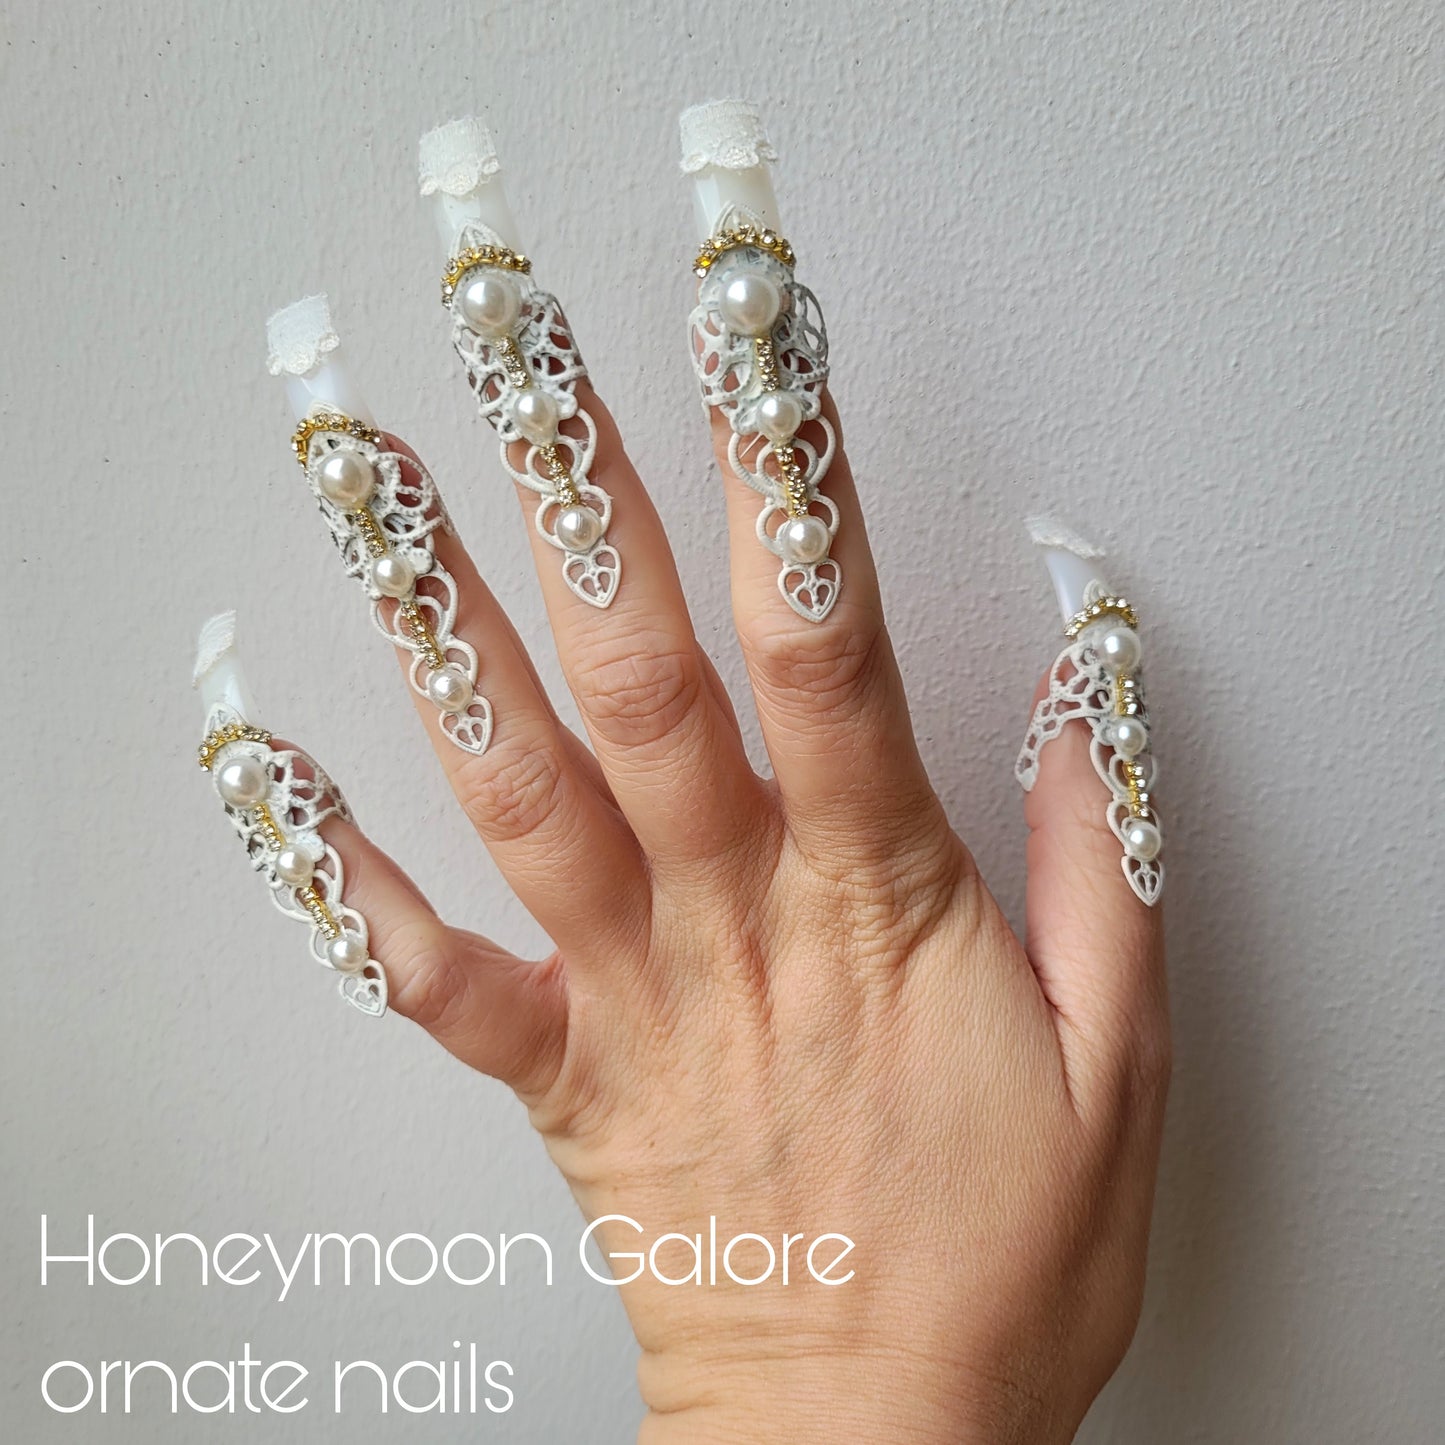 Made-to-order: the Honeymoon Galore ornate nails